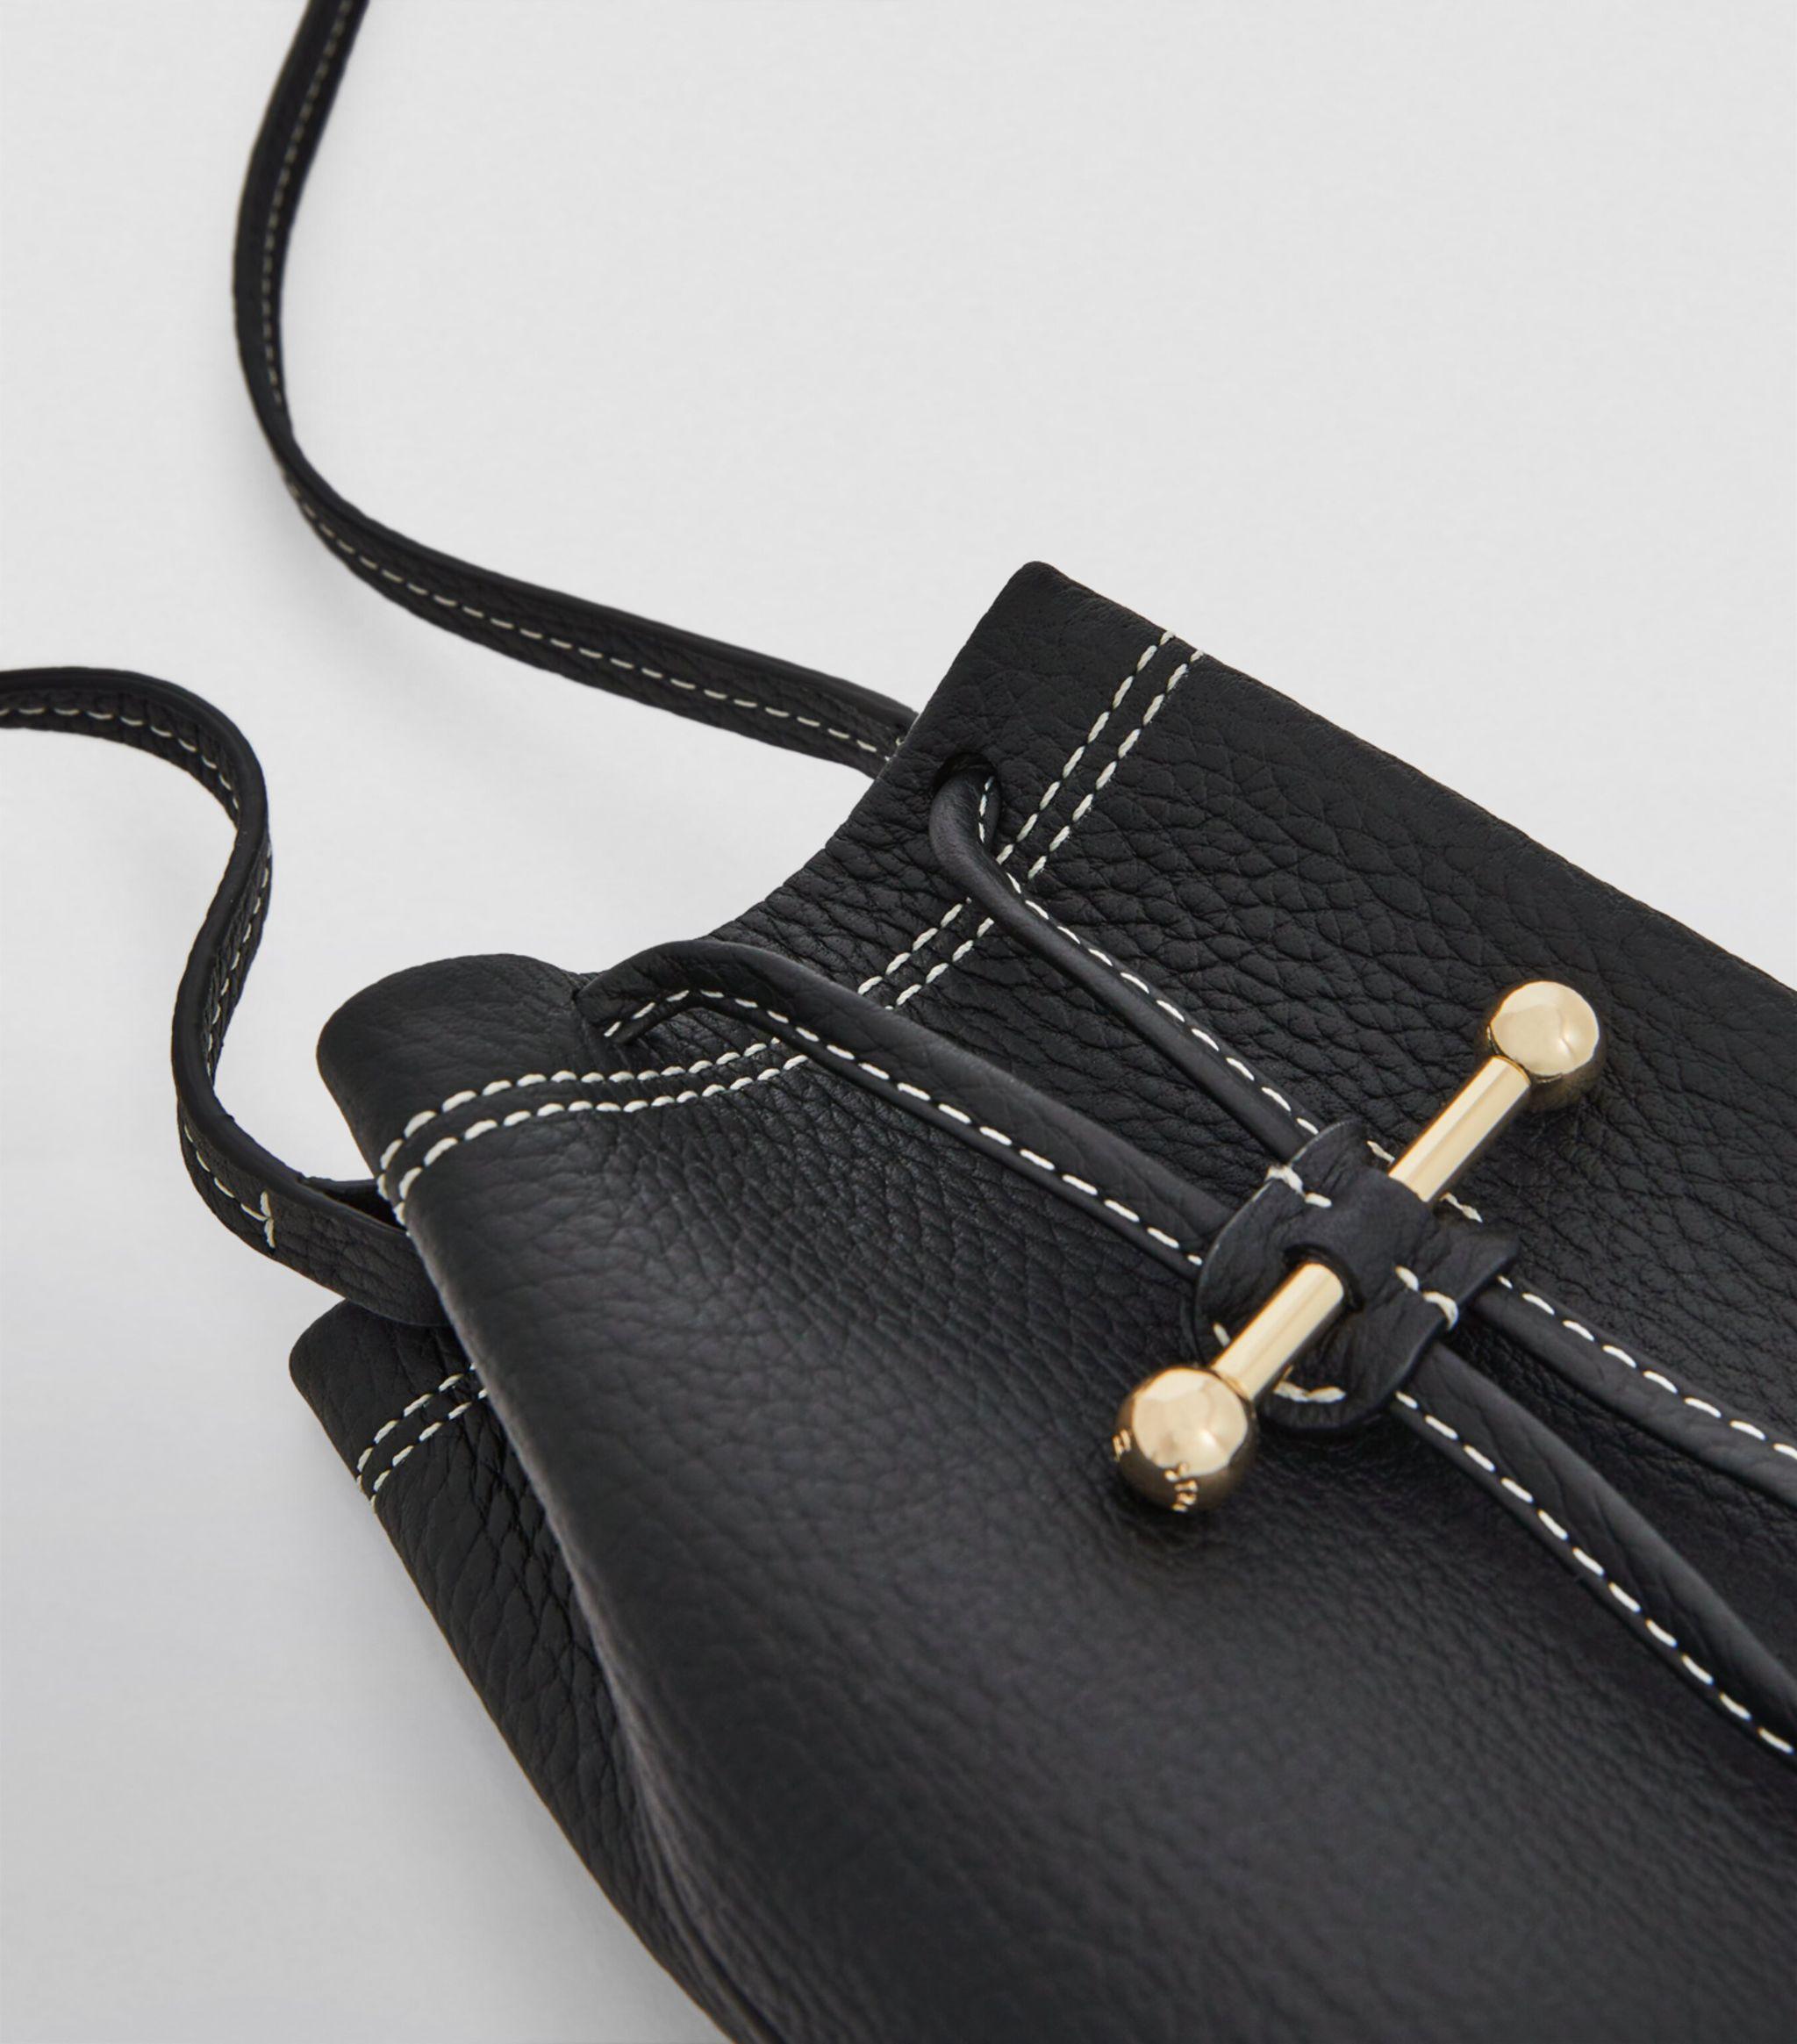 Strathberry Lana Osette Leather Bucket Bag In Black